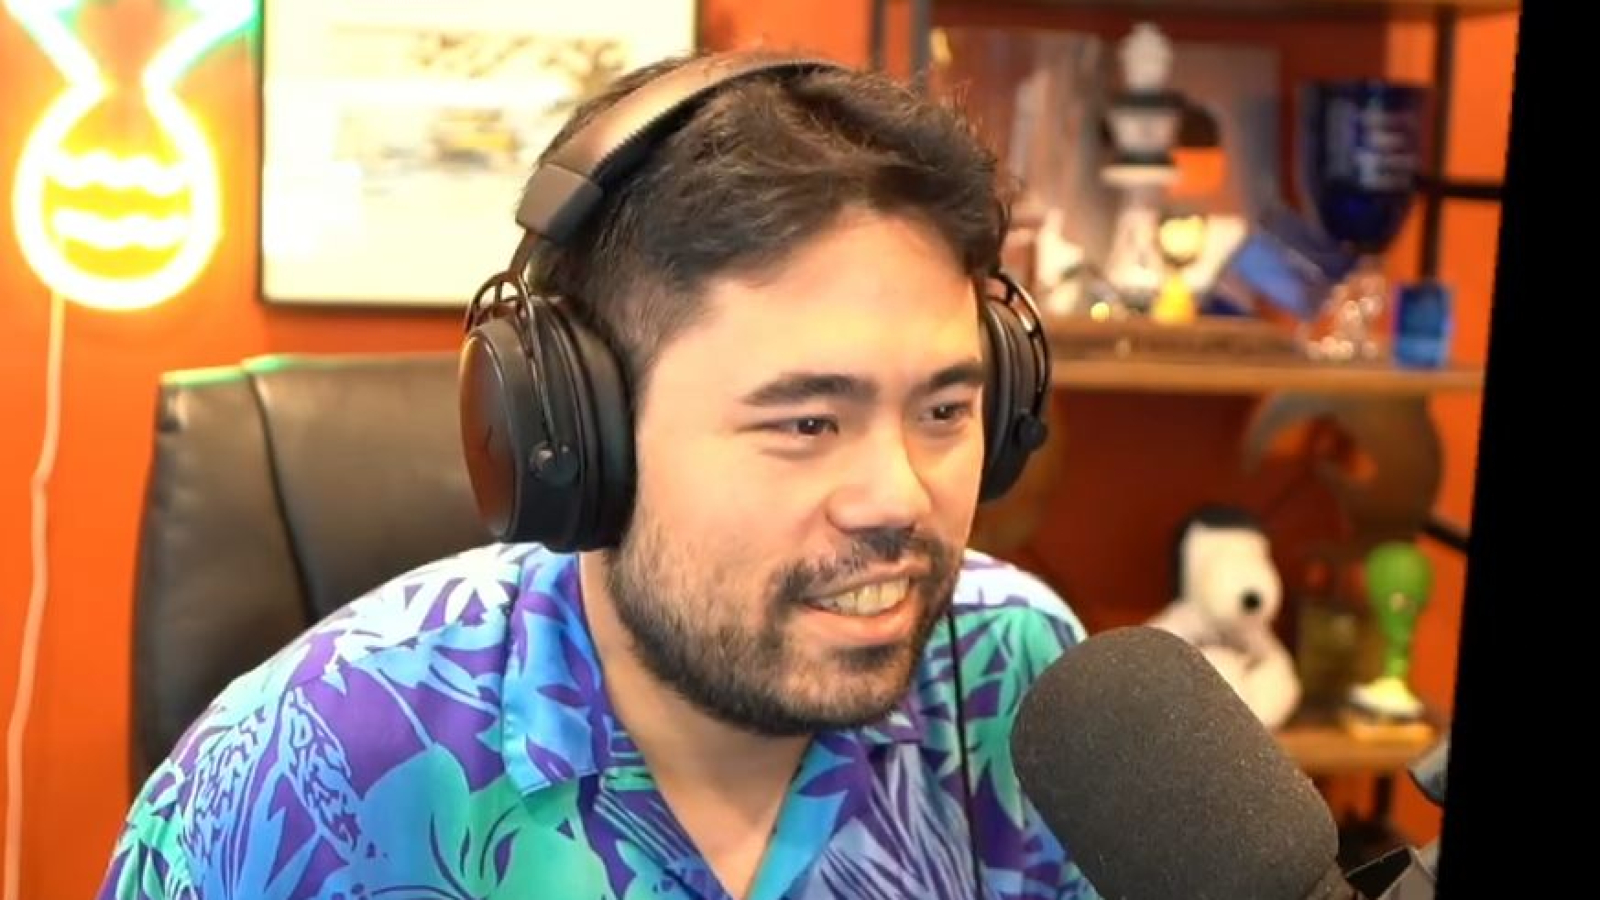 GMHikaru banned on Twitch, says reason is for watching Dr